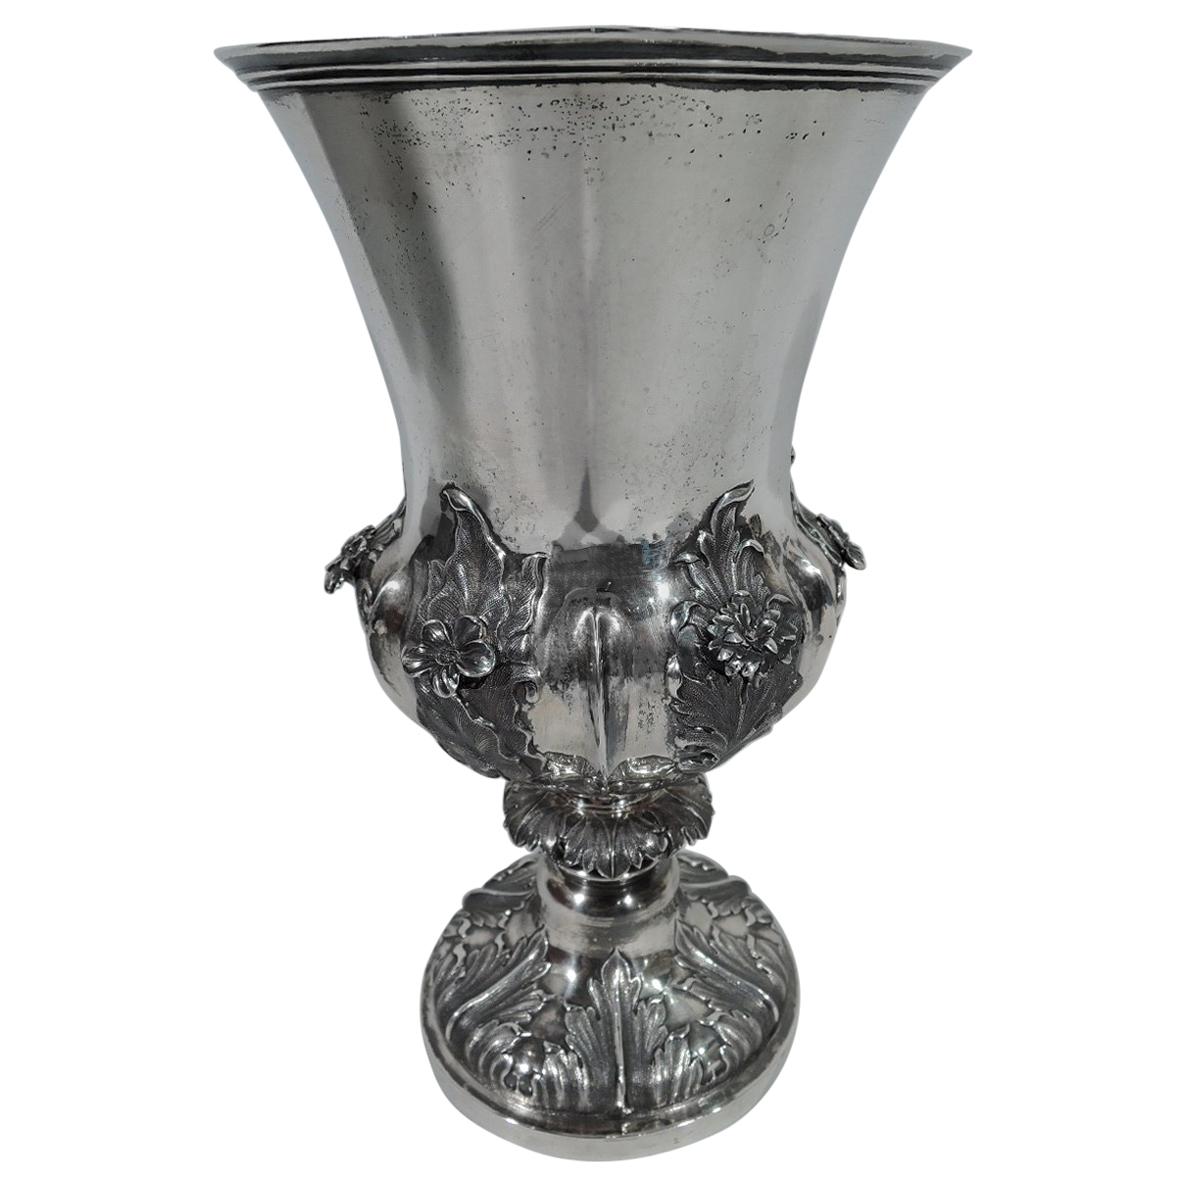 Indian Colonial Silver Chalice by Hamilton & Co.